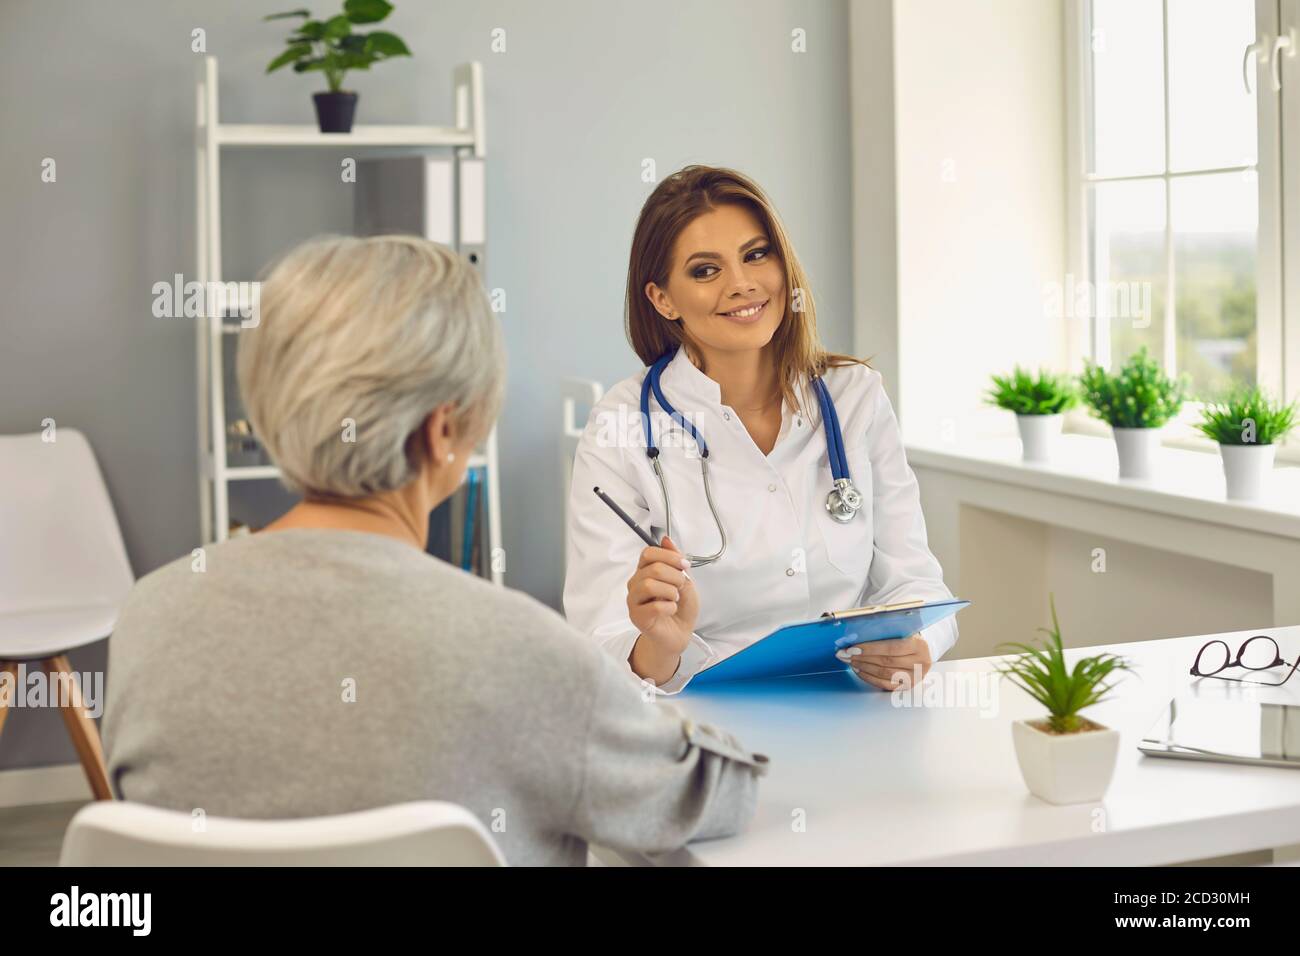 Smiling woman doctor therapist consulting senior woman patient in medical clinic office Stock Photo